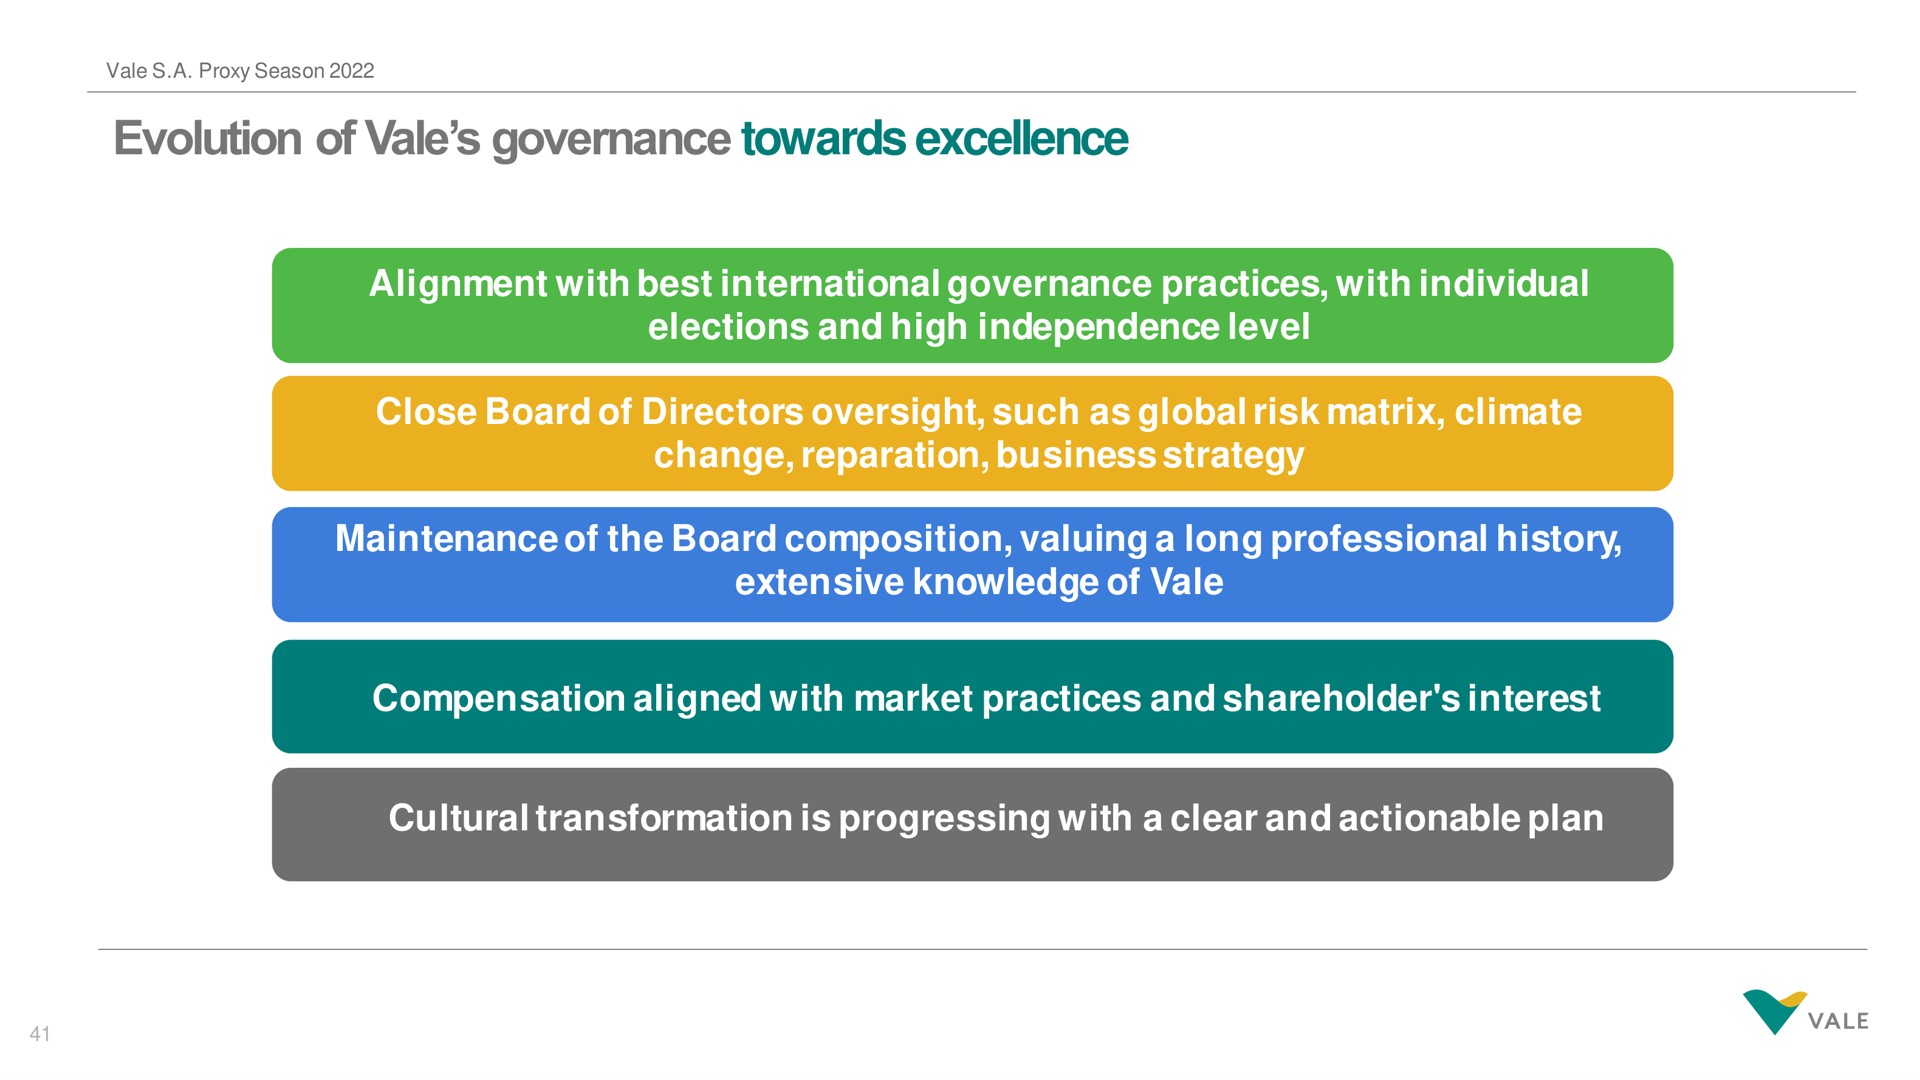 evolution of vale governance towards excellence alignment with best international practices with individual elections and high independence level change reparation business strategy maintenance the board composition valuing a long professional history compensation aligned with market practices and shareholder interest cultural transformation is progressing with a clear and actionable plan | Vale